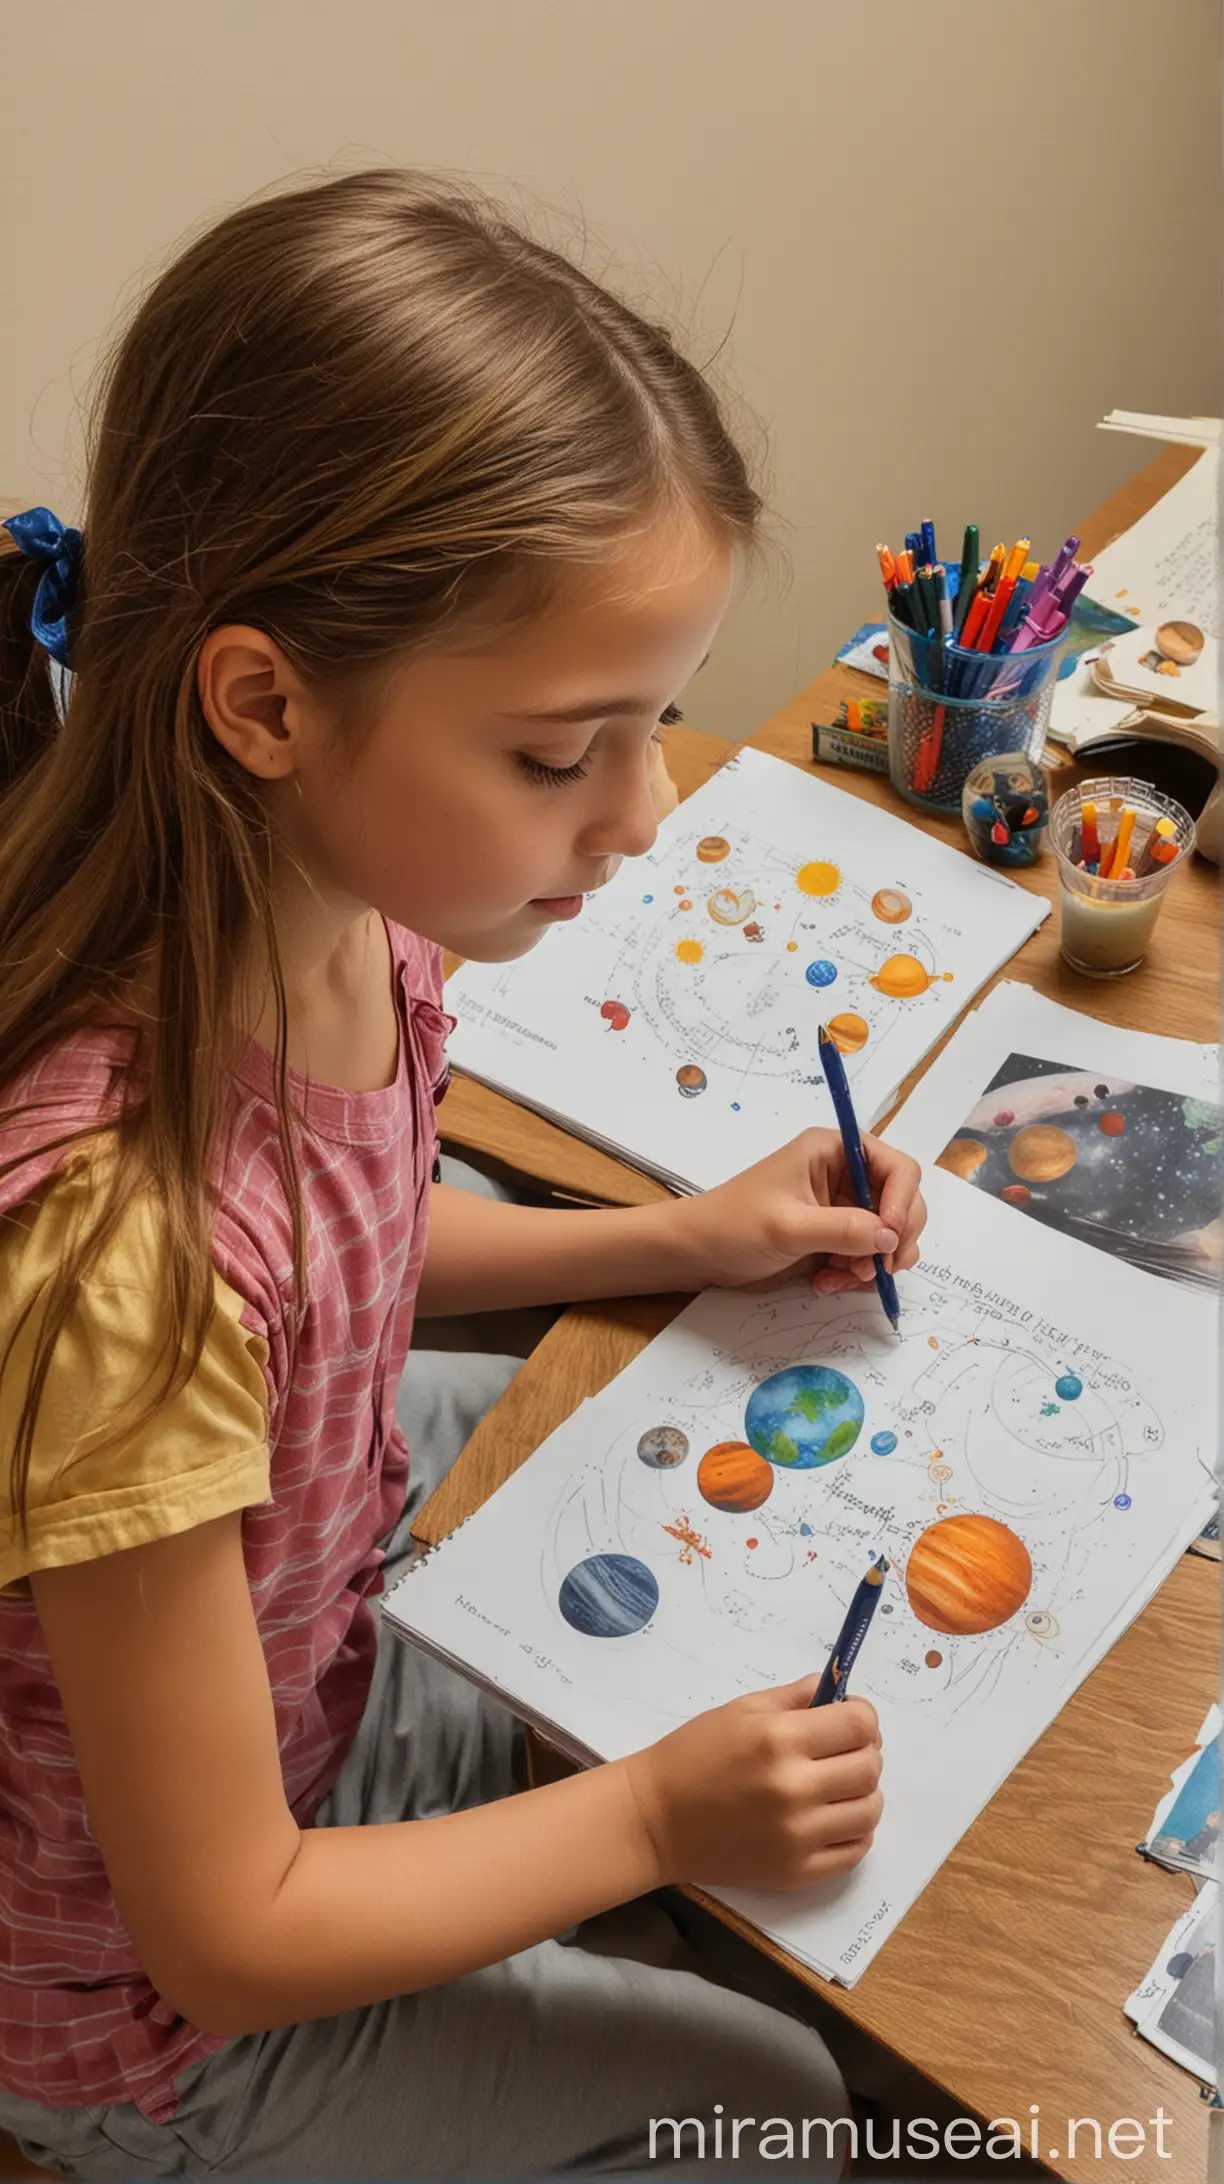 An elementary school student doing homework. She is drawing. There is a picture book of the planets in our solar system.